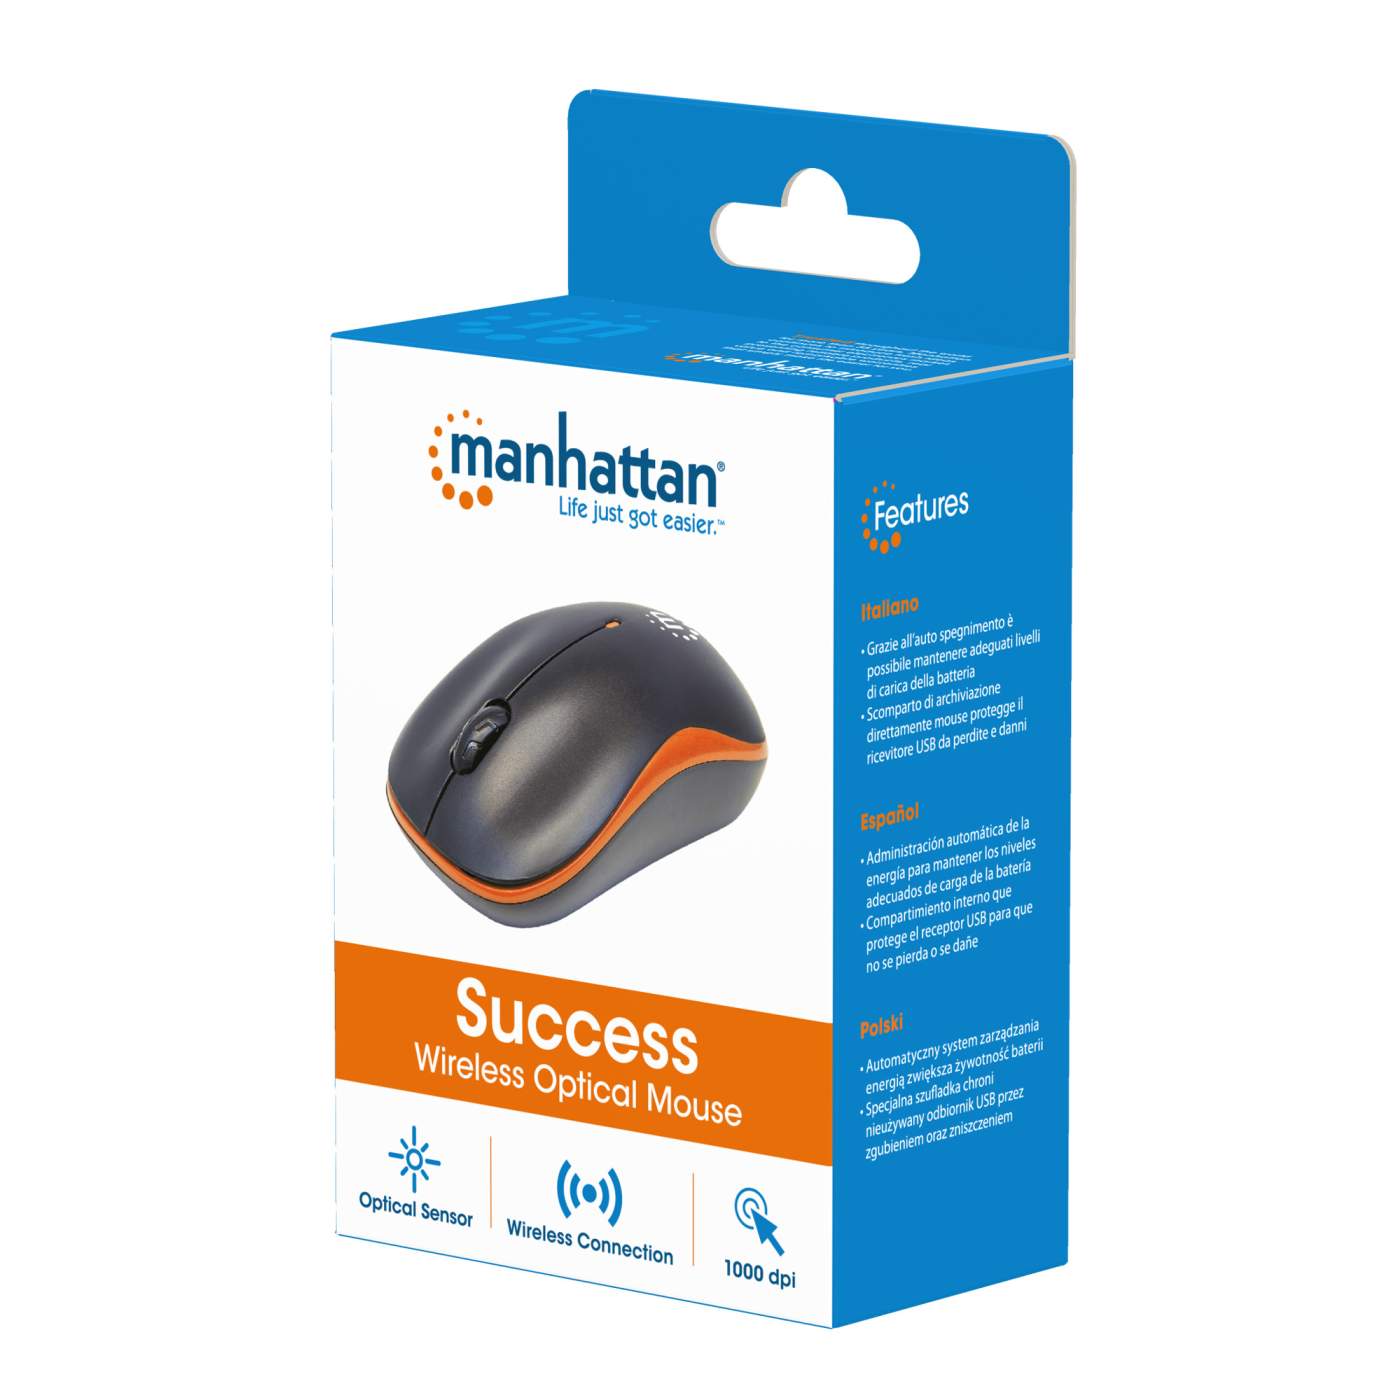 Success Wireless Optical Mouse Packaging Image 2